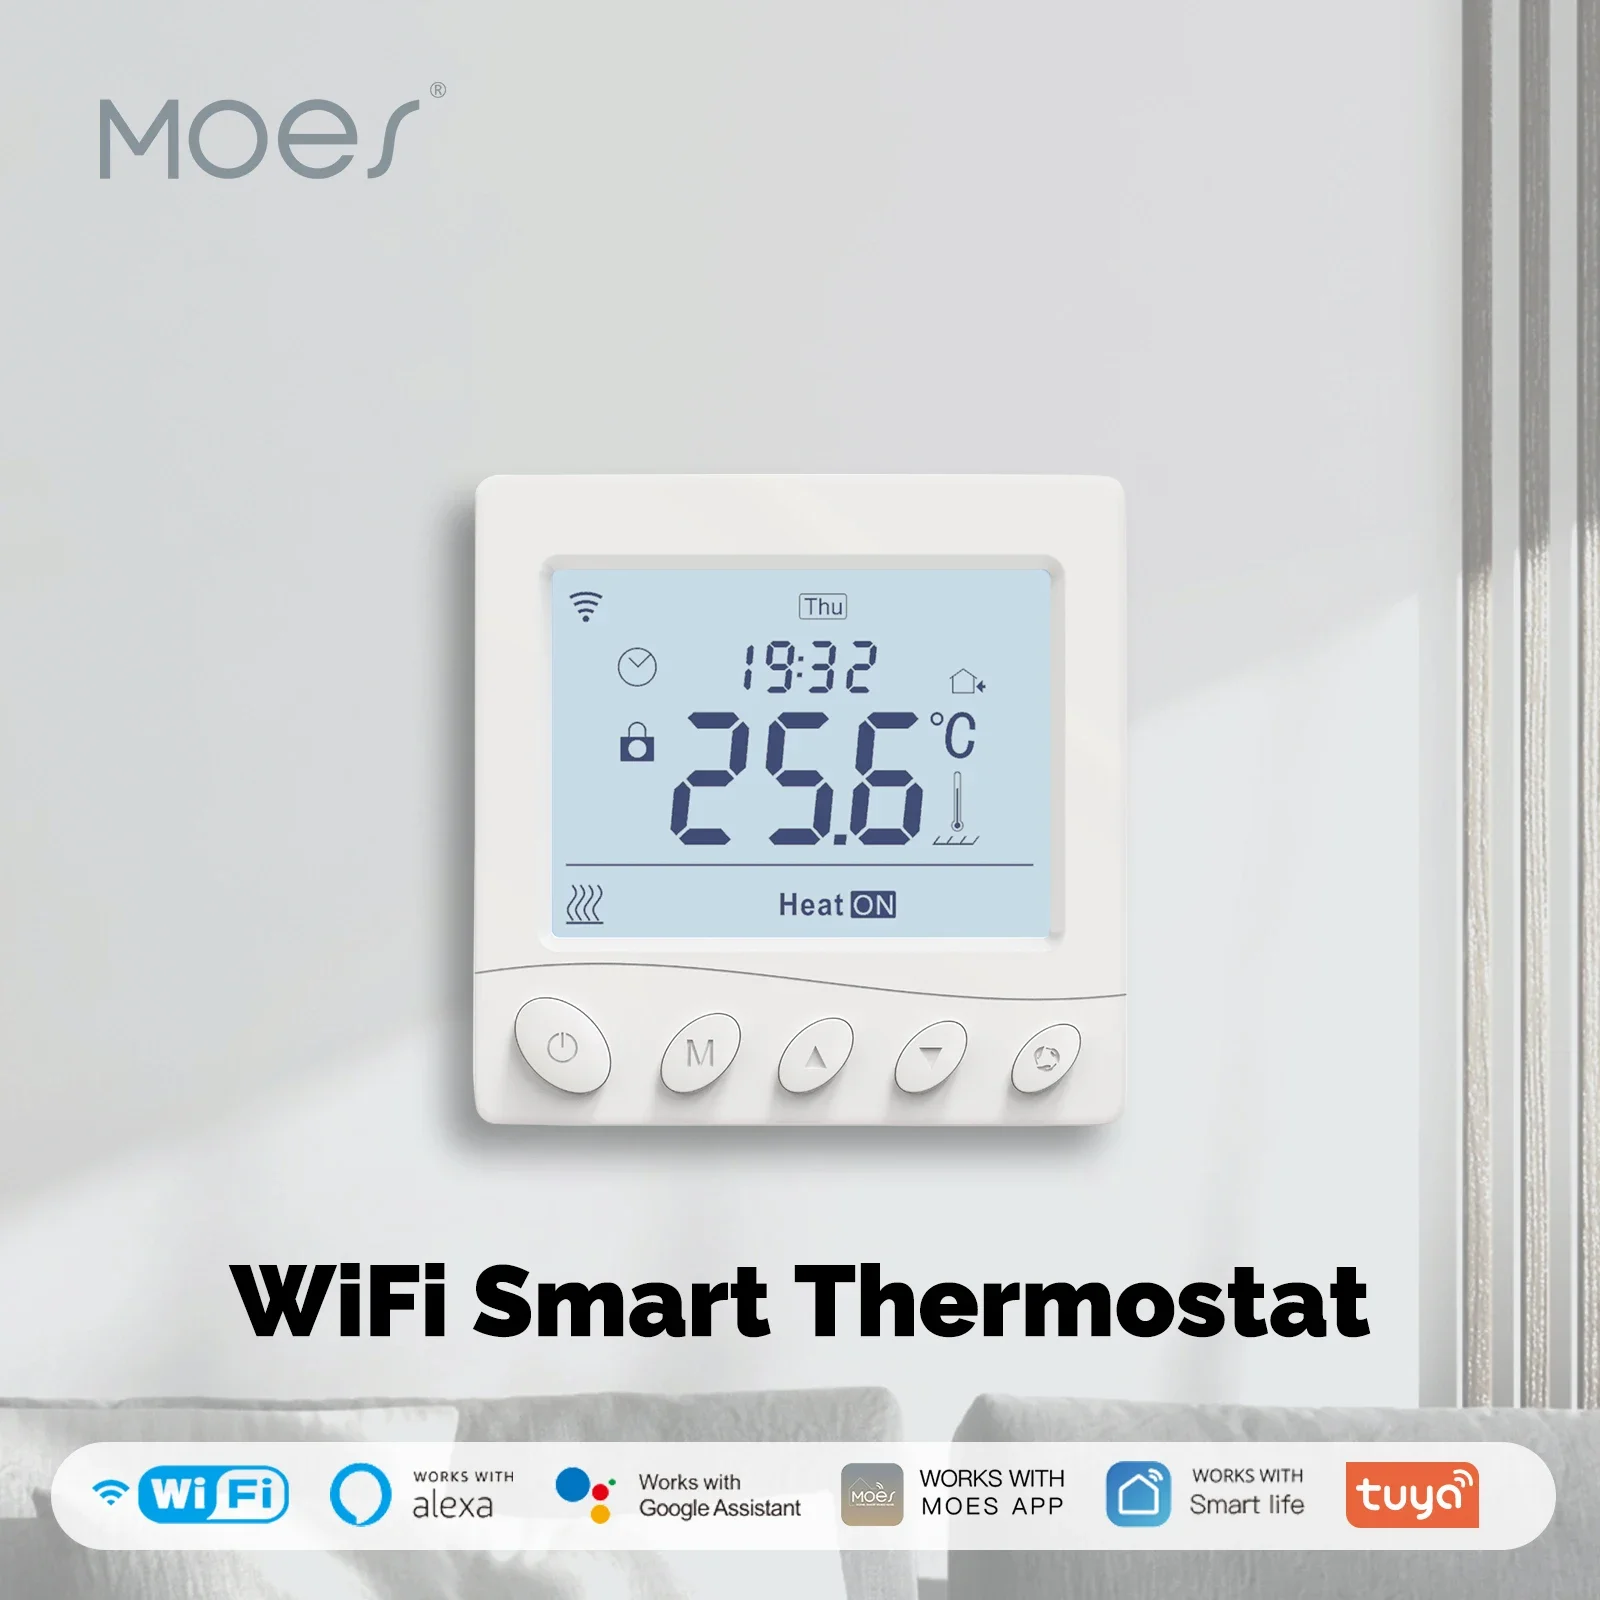 

Tuya WiFi Thermostat Room Temperature Controller Water/Electric Floor Heating Gas Boiler App Control Work With Alexa Google Home